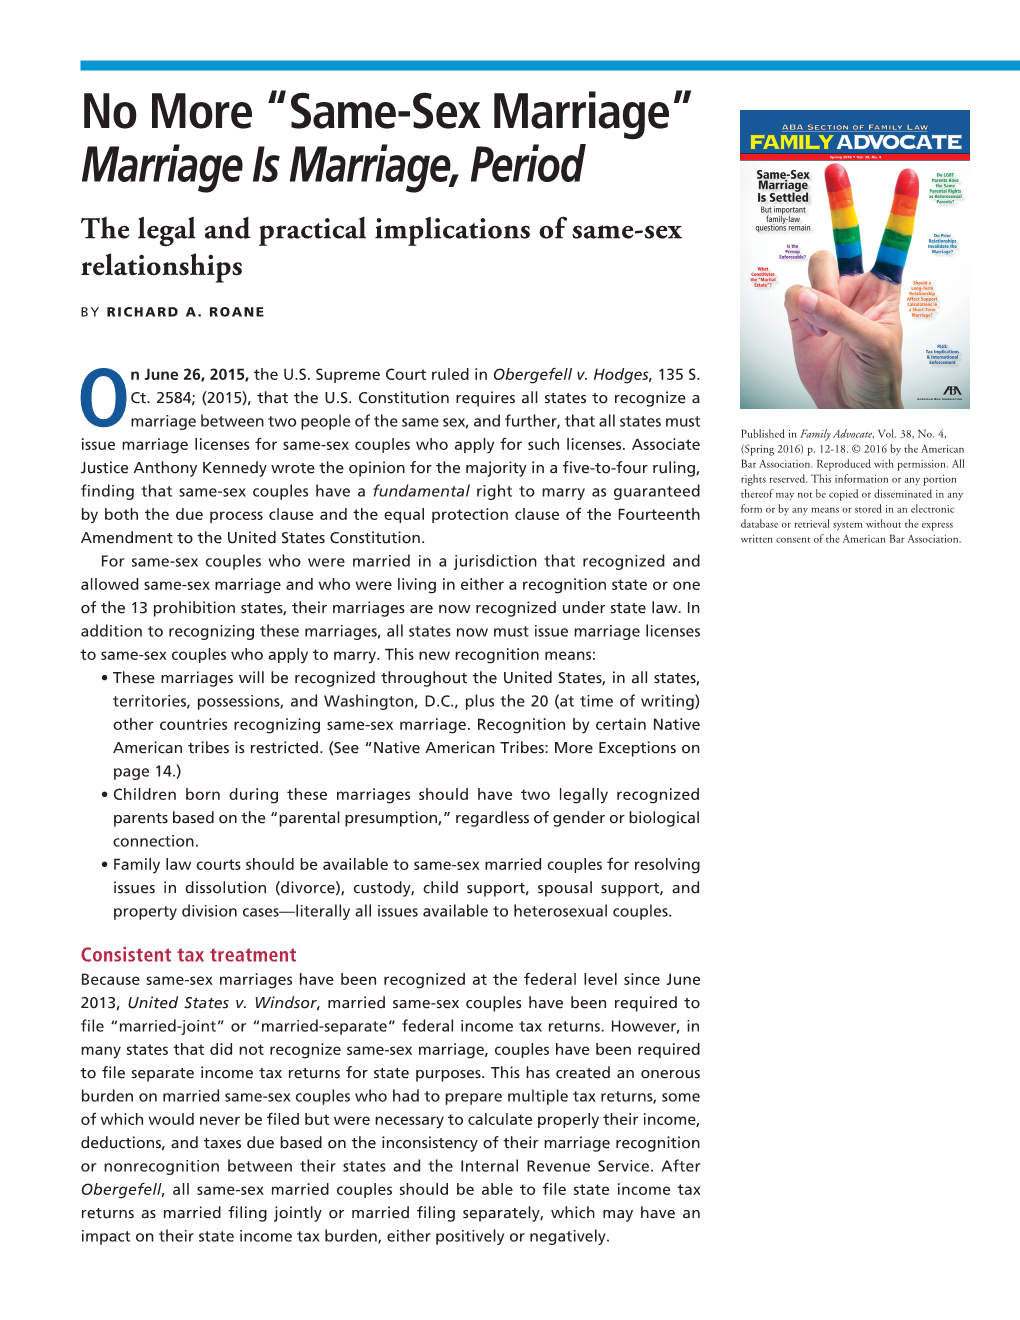 No More “Same-Sex Marriage” Marriage Is Marriage, Period the Legal and Practical Implications of Same-Sex Relationships